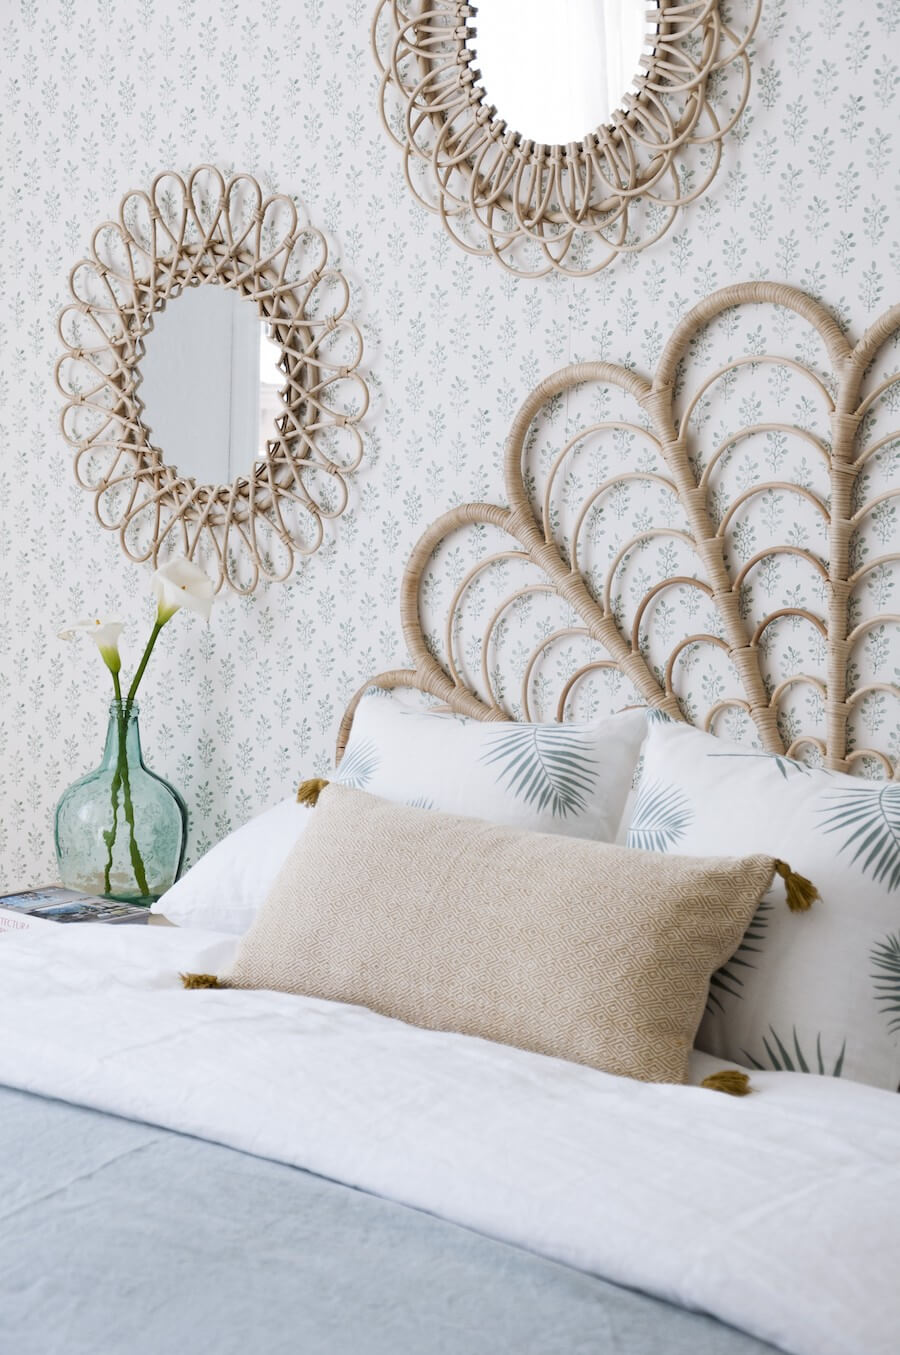 Rattan Stands Out Against Vintage Wallpaper